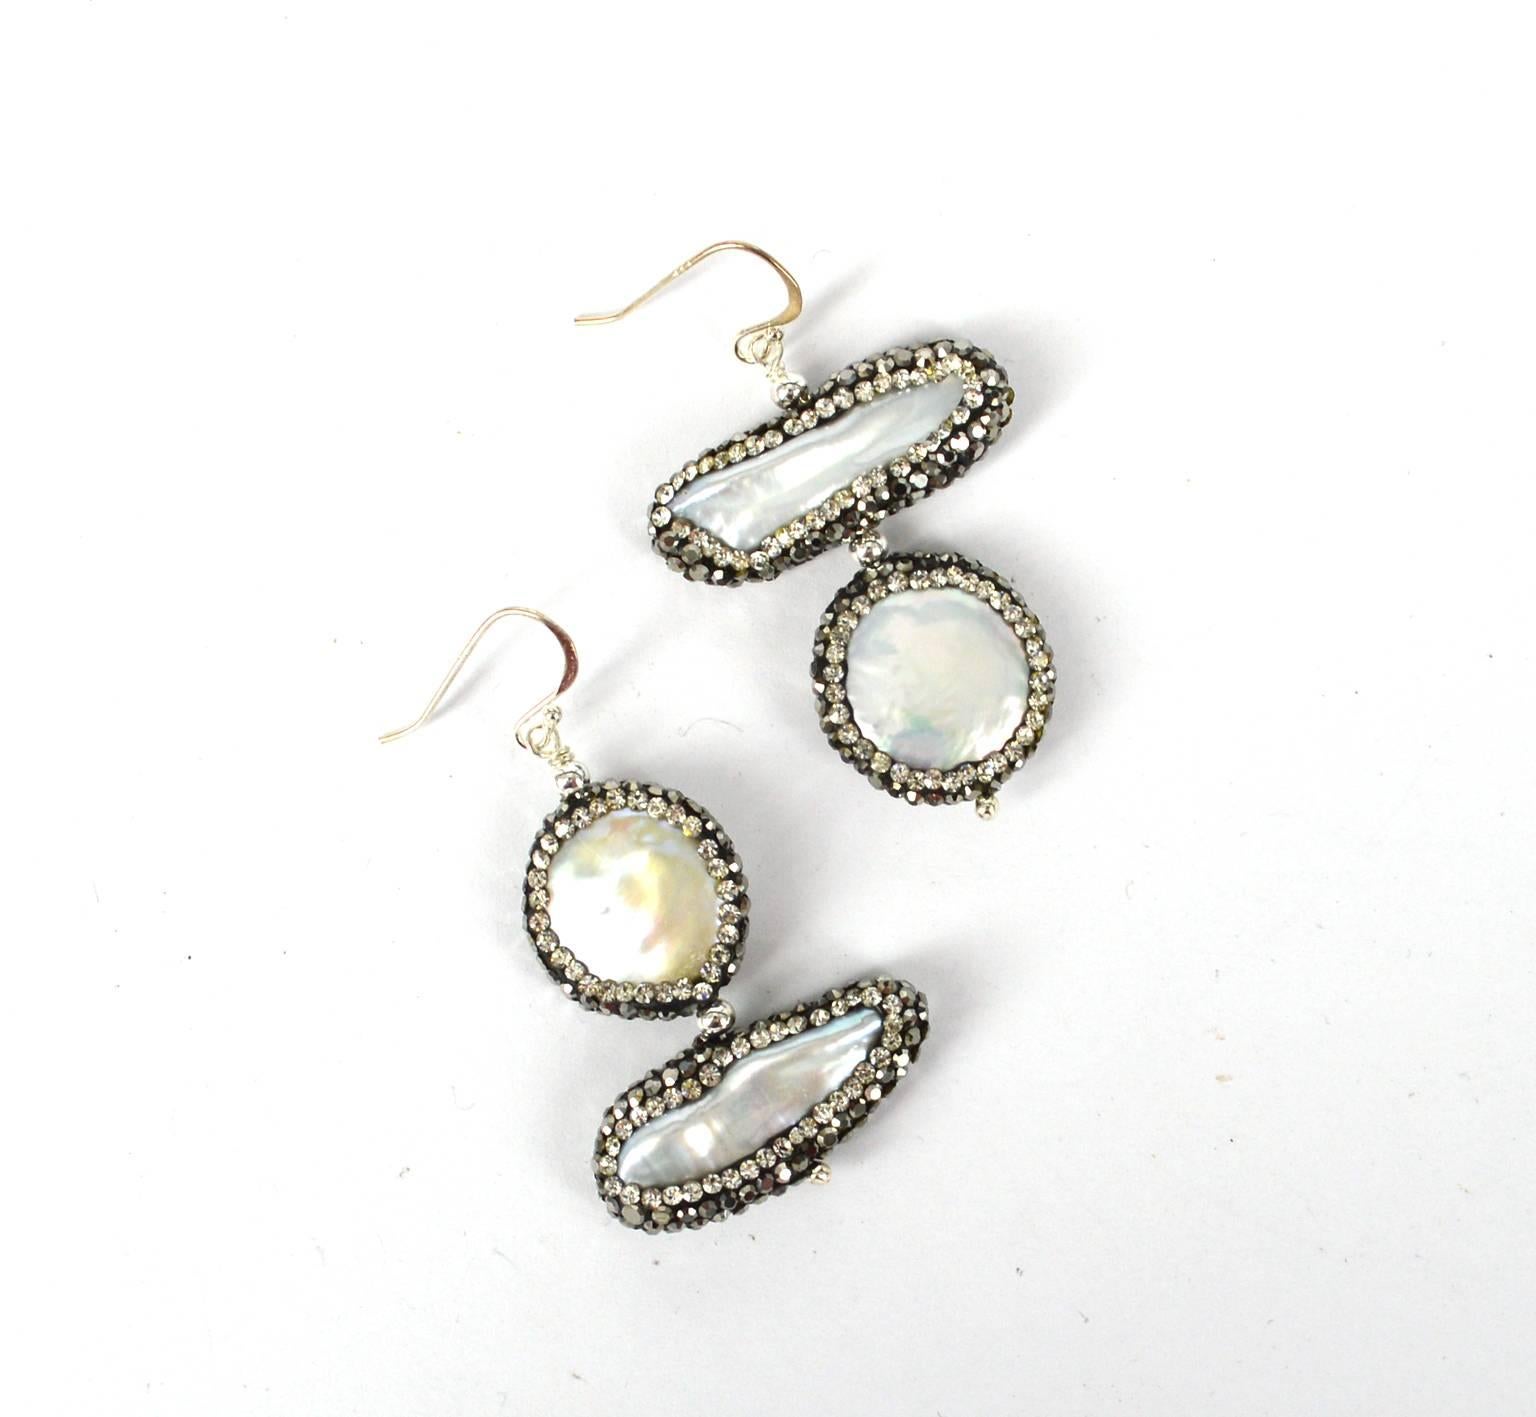 A unique design with a topsy turvy combination.
Freshwater Biwa and coin pearls encrusted with Cubic Zirconia.
Sterling silver beads and earwires.
Total length is 50mm

All pearls are natural and have natural inclusions.